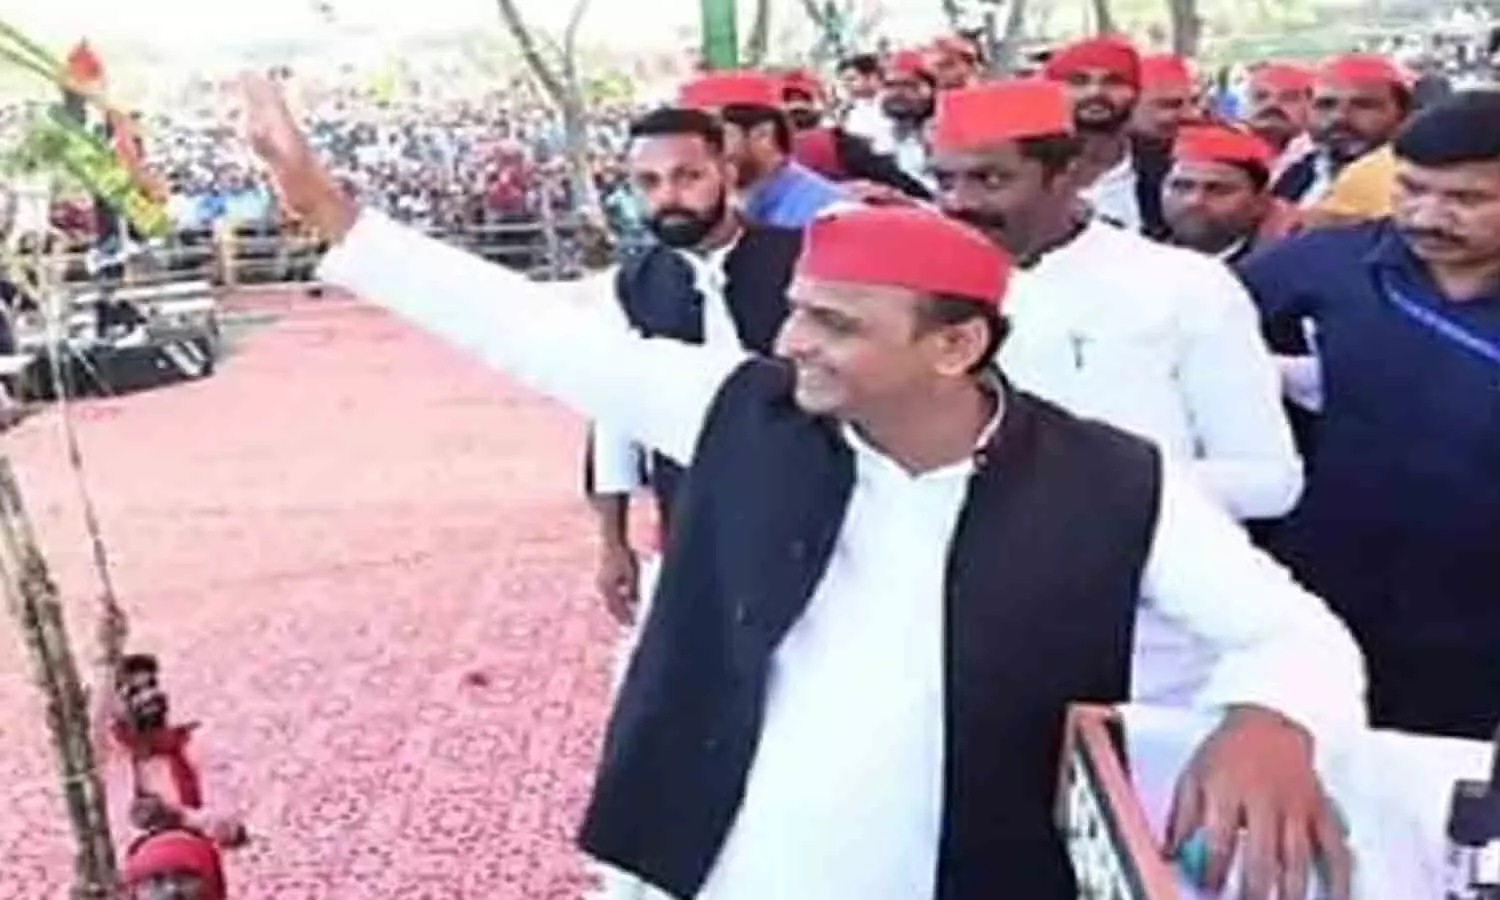 UP Election 2022: Akhilesh Yadav said - people who defame our cap were forced to wear caps